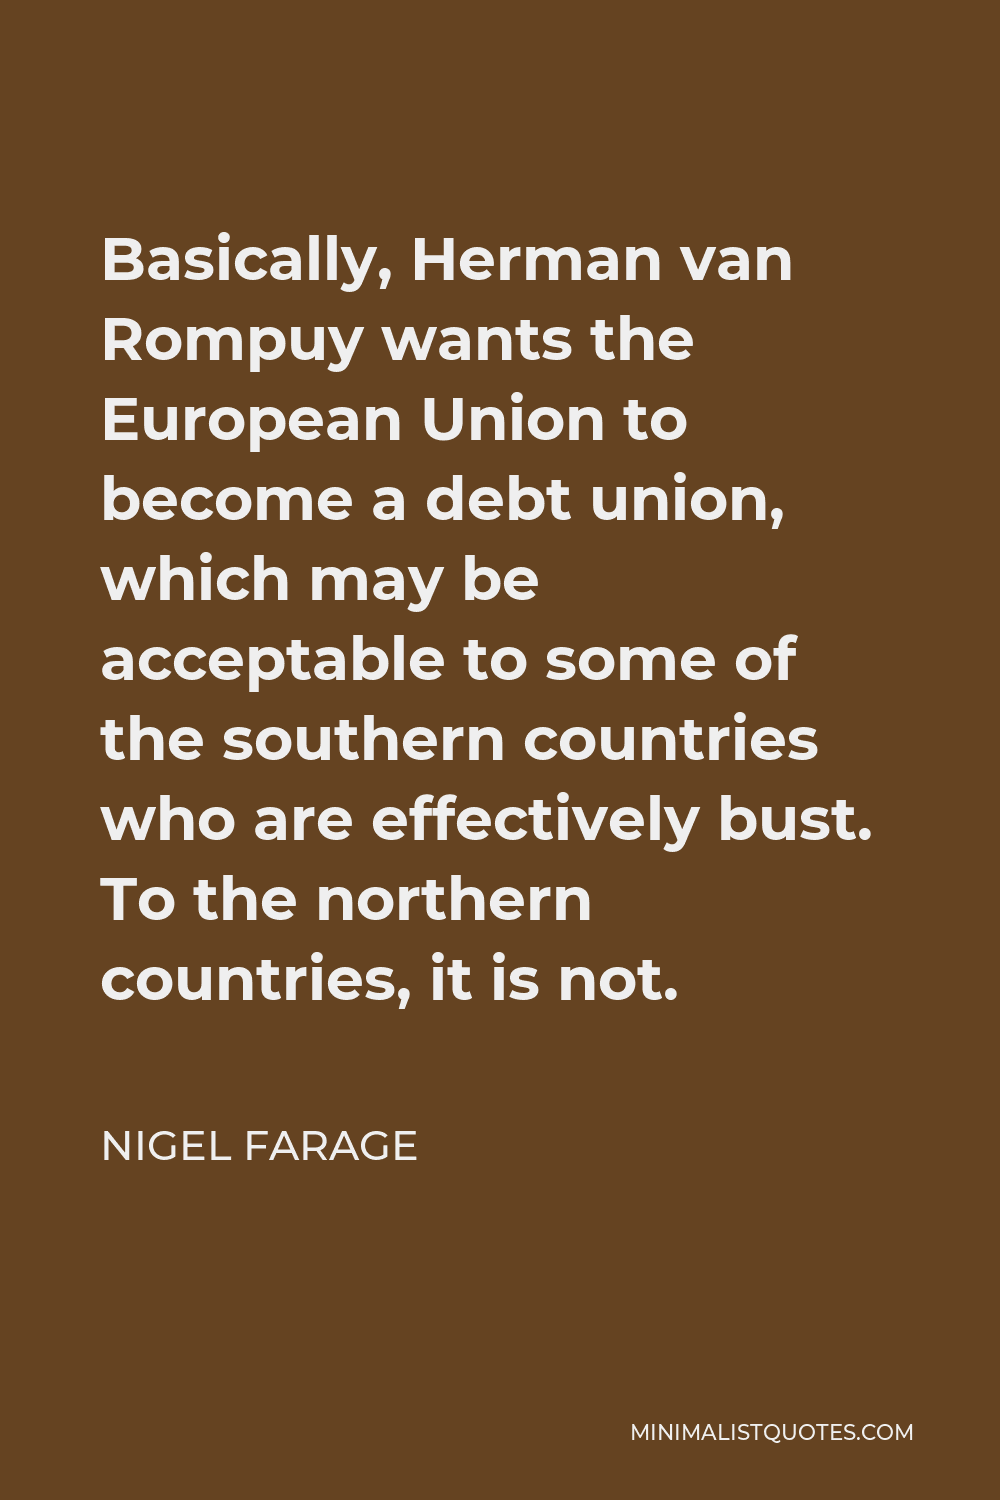 Nigel Farage Quote - Basically, Herman van Rompuy wants the European Union to become a debt union, which may be acceptable to some of the southern countries who are effectively bust. To the northern countries, it is not.